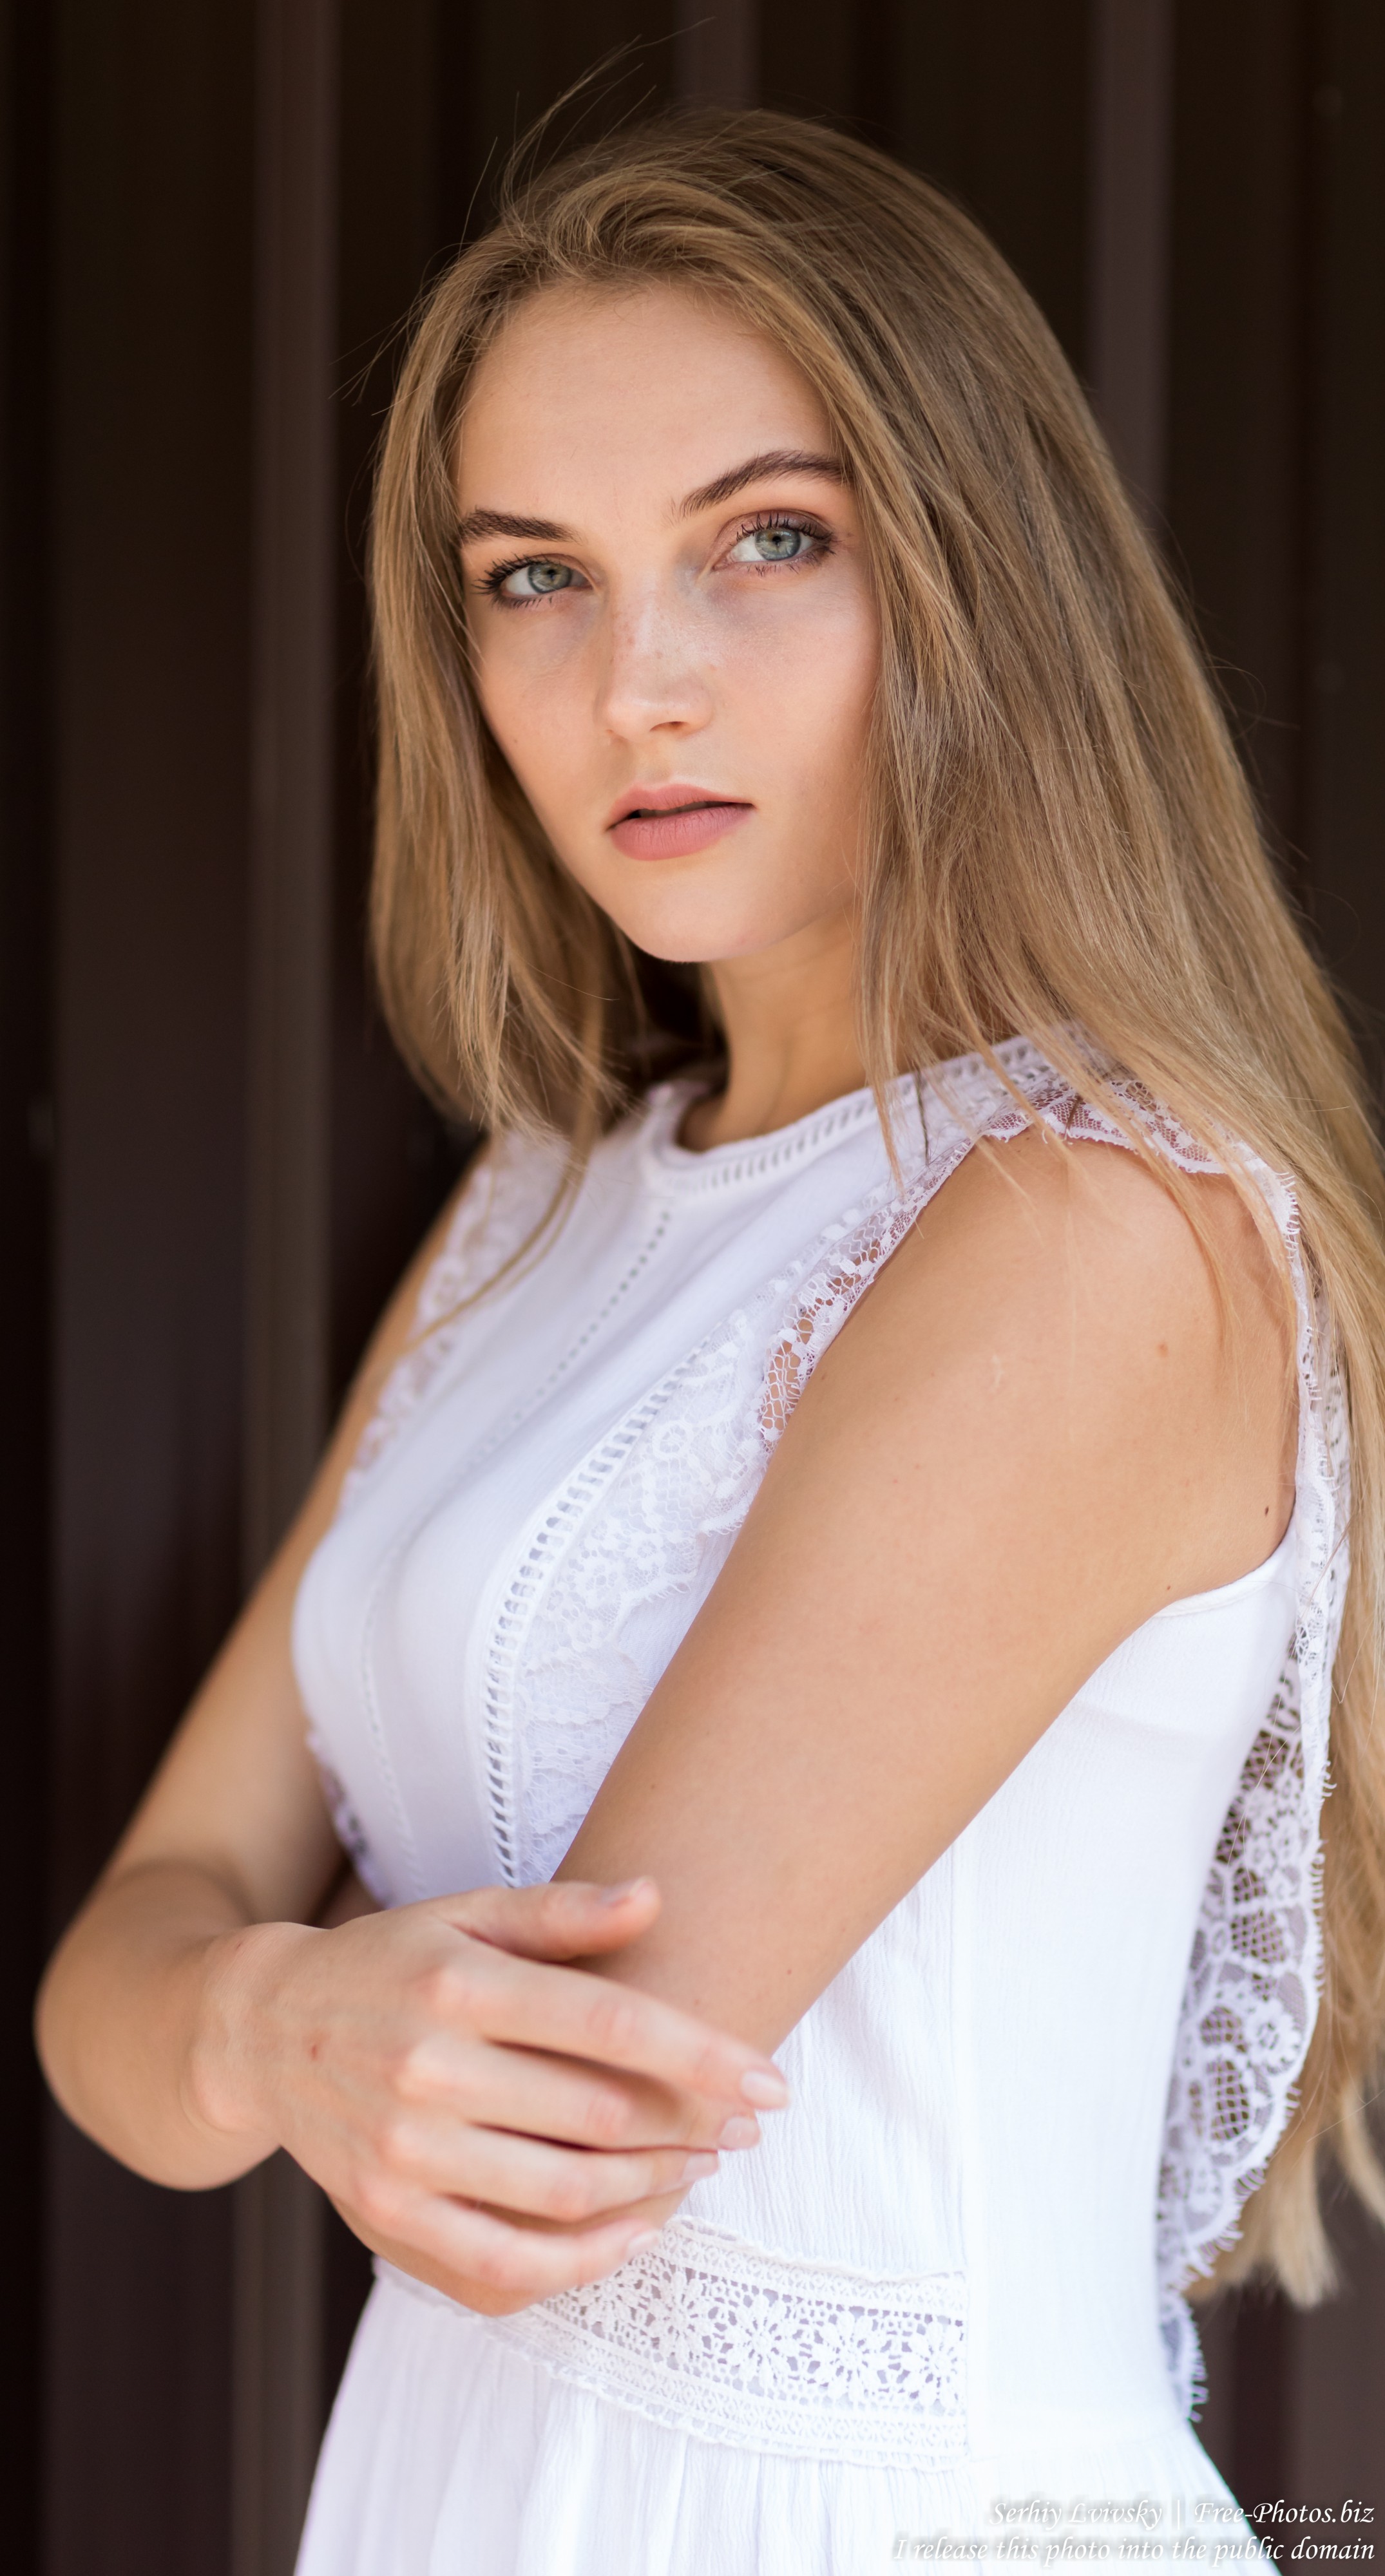 Yaryna - a 21-year-old natural blonde Catholic girl photographed in August 2019 by Serhiy Lvivsky, picture 26